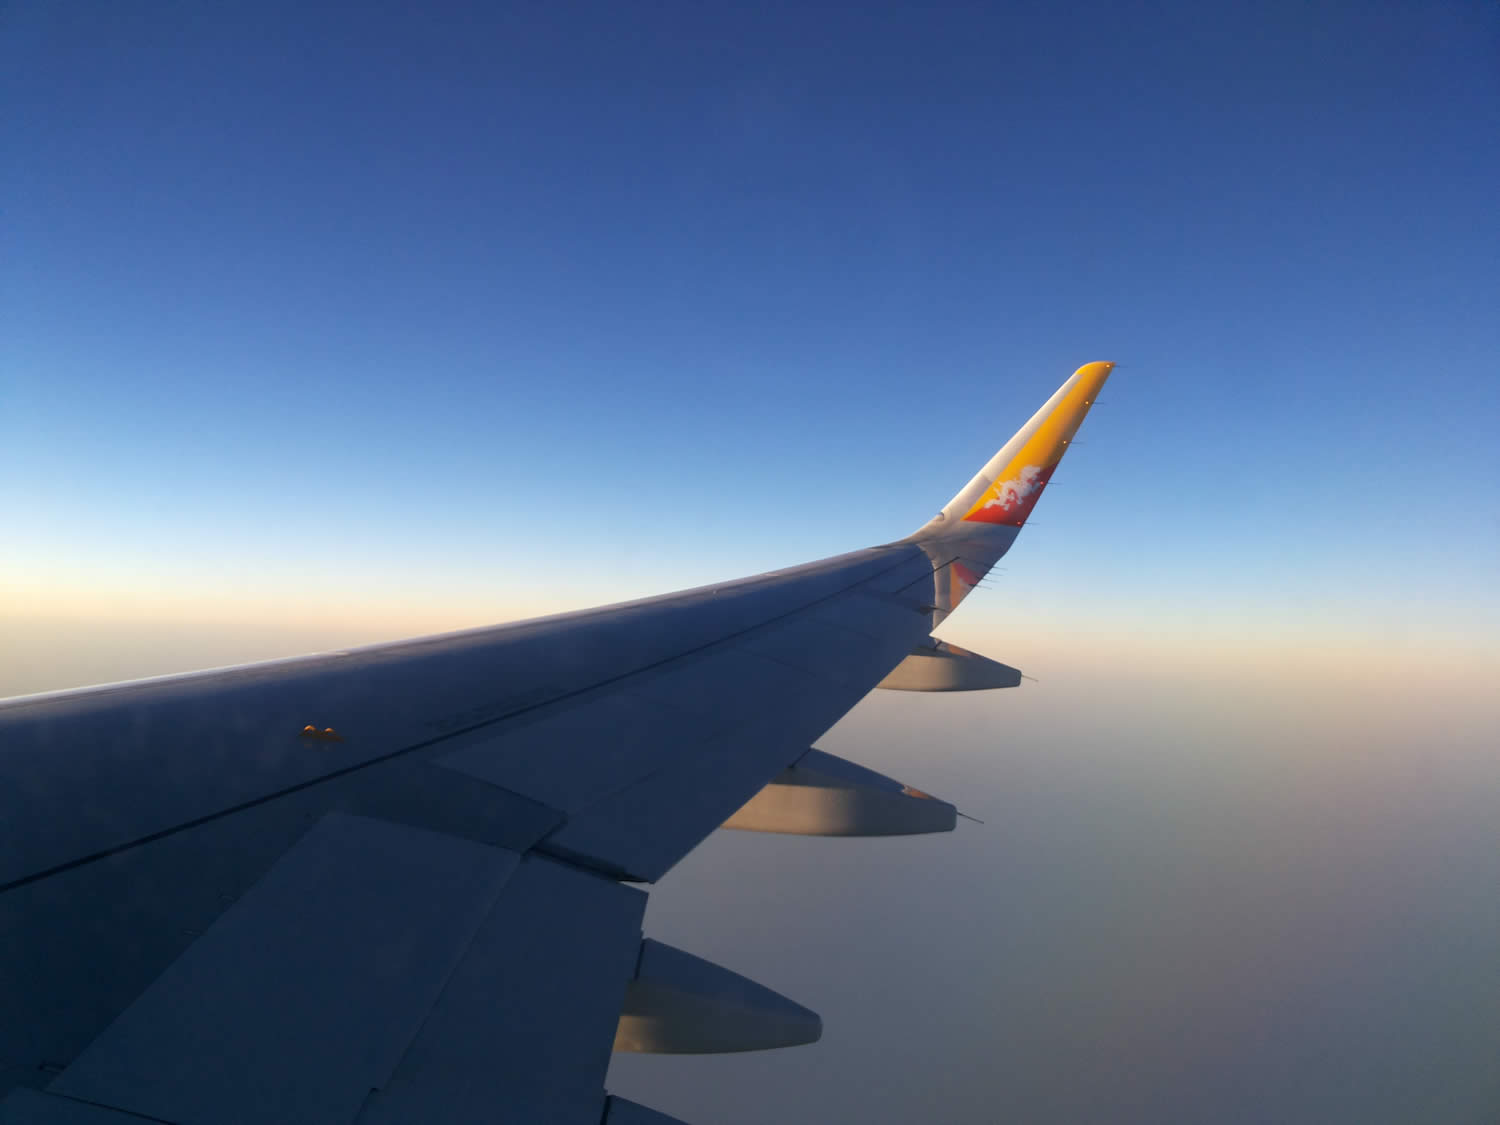 A beautiful sunrise as seen from the Druk Air flight from Delhi to Paro.